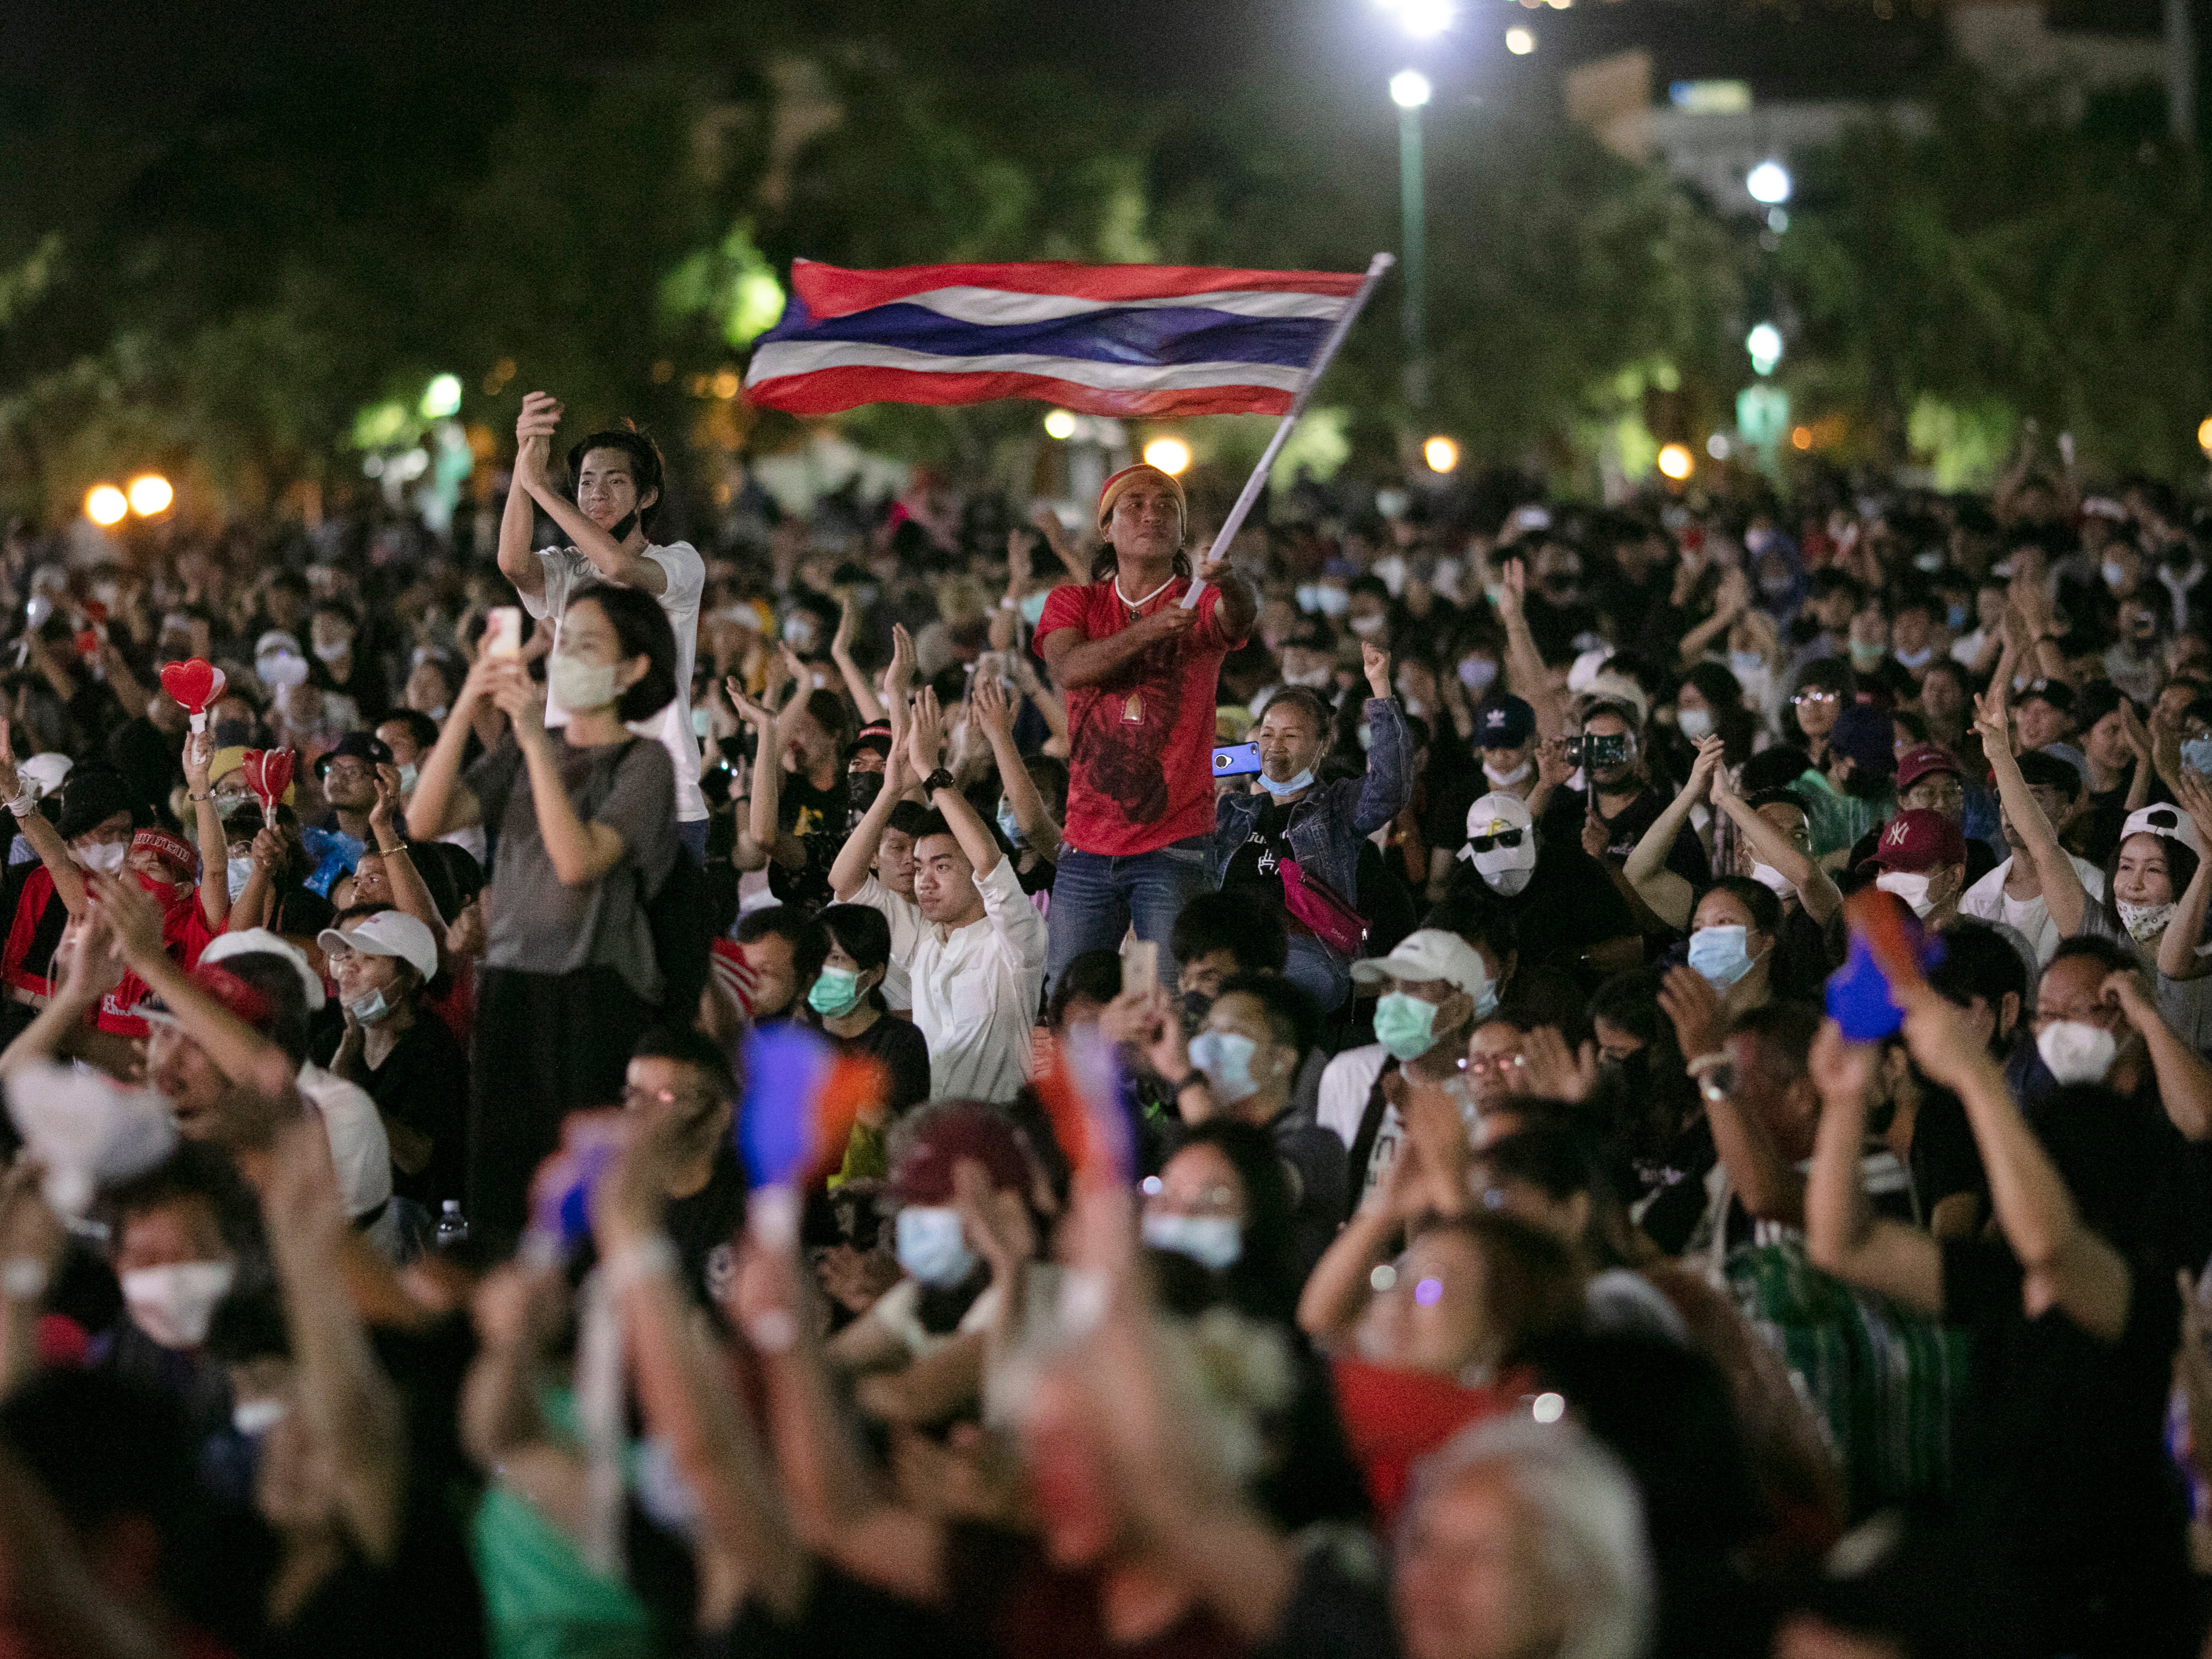 Pro-democracy protesters wave the national flag at the Sanam Luang field during a protest in Bangkok, Thailand